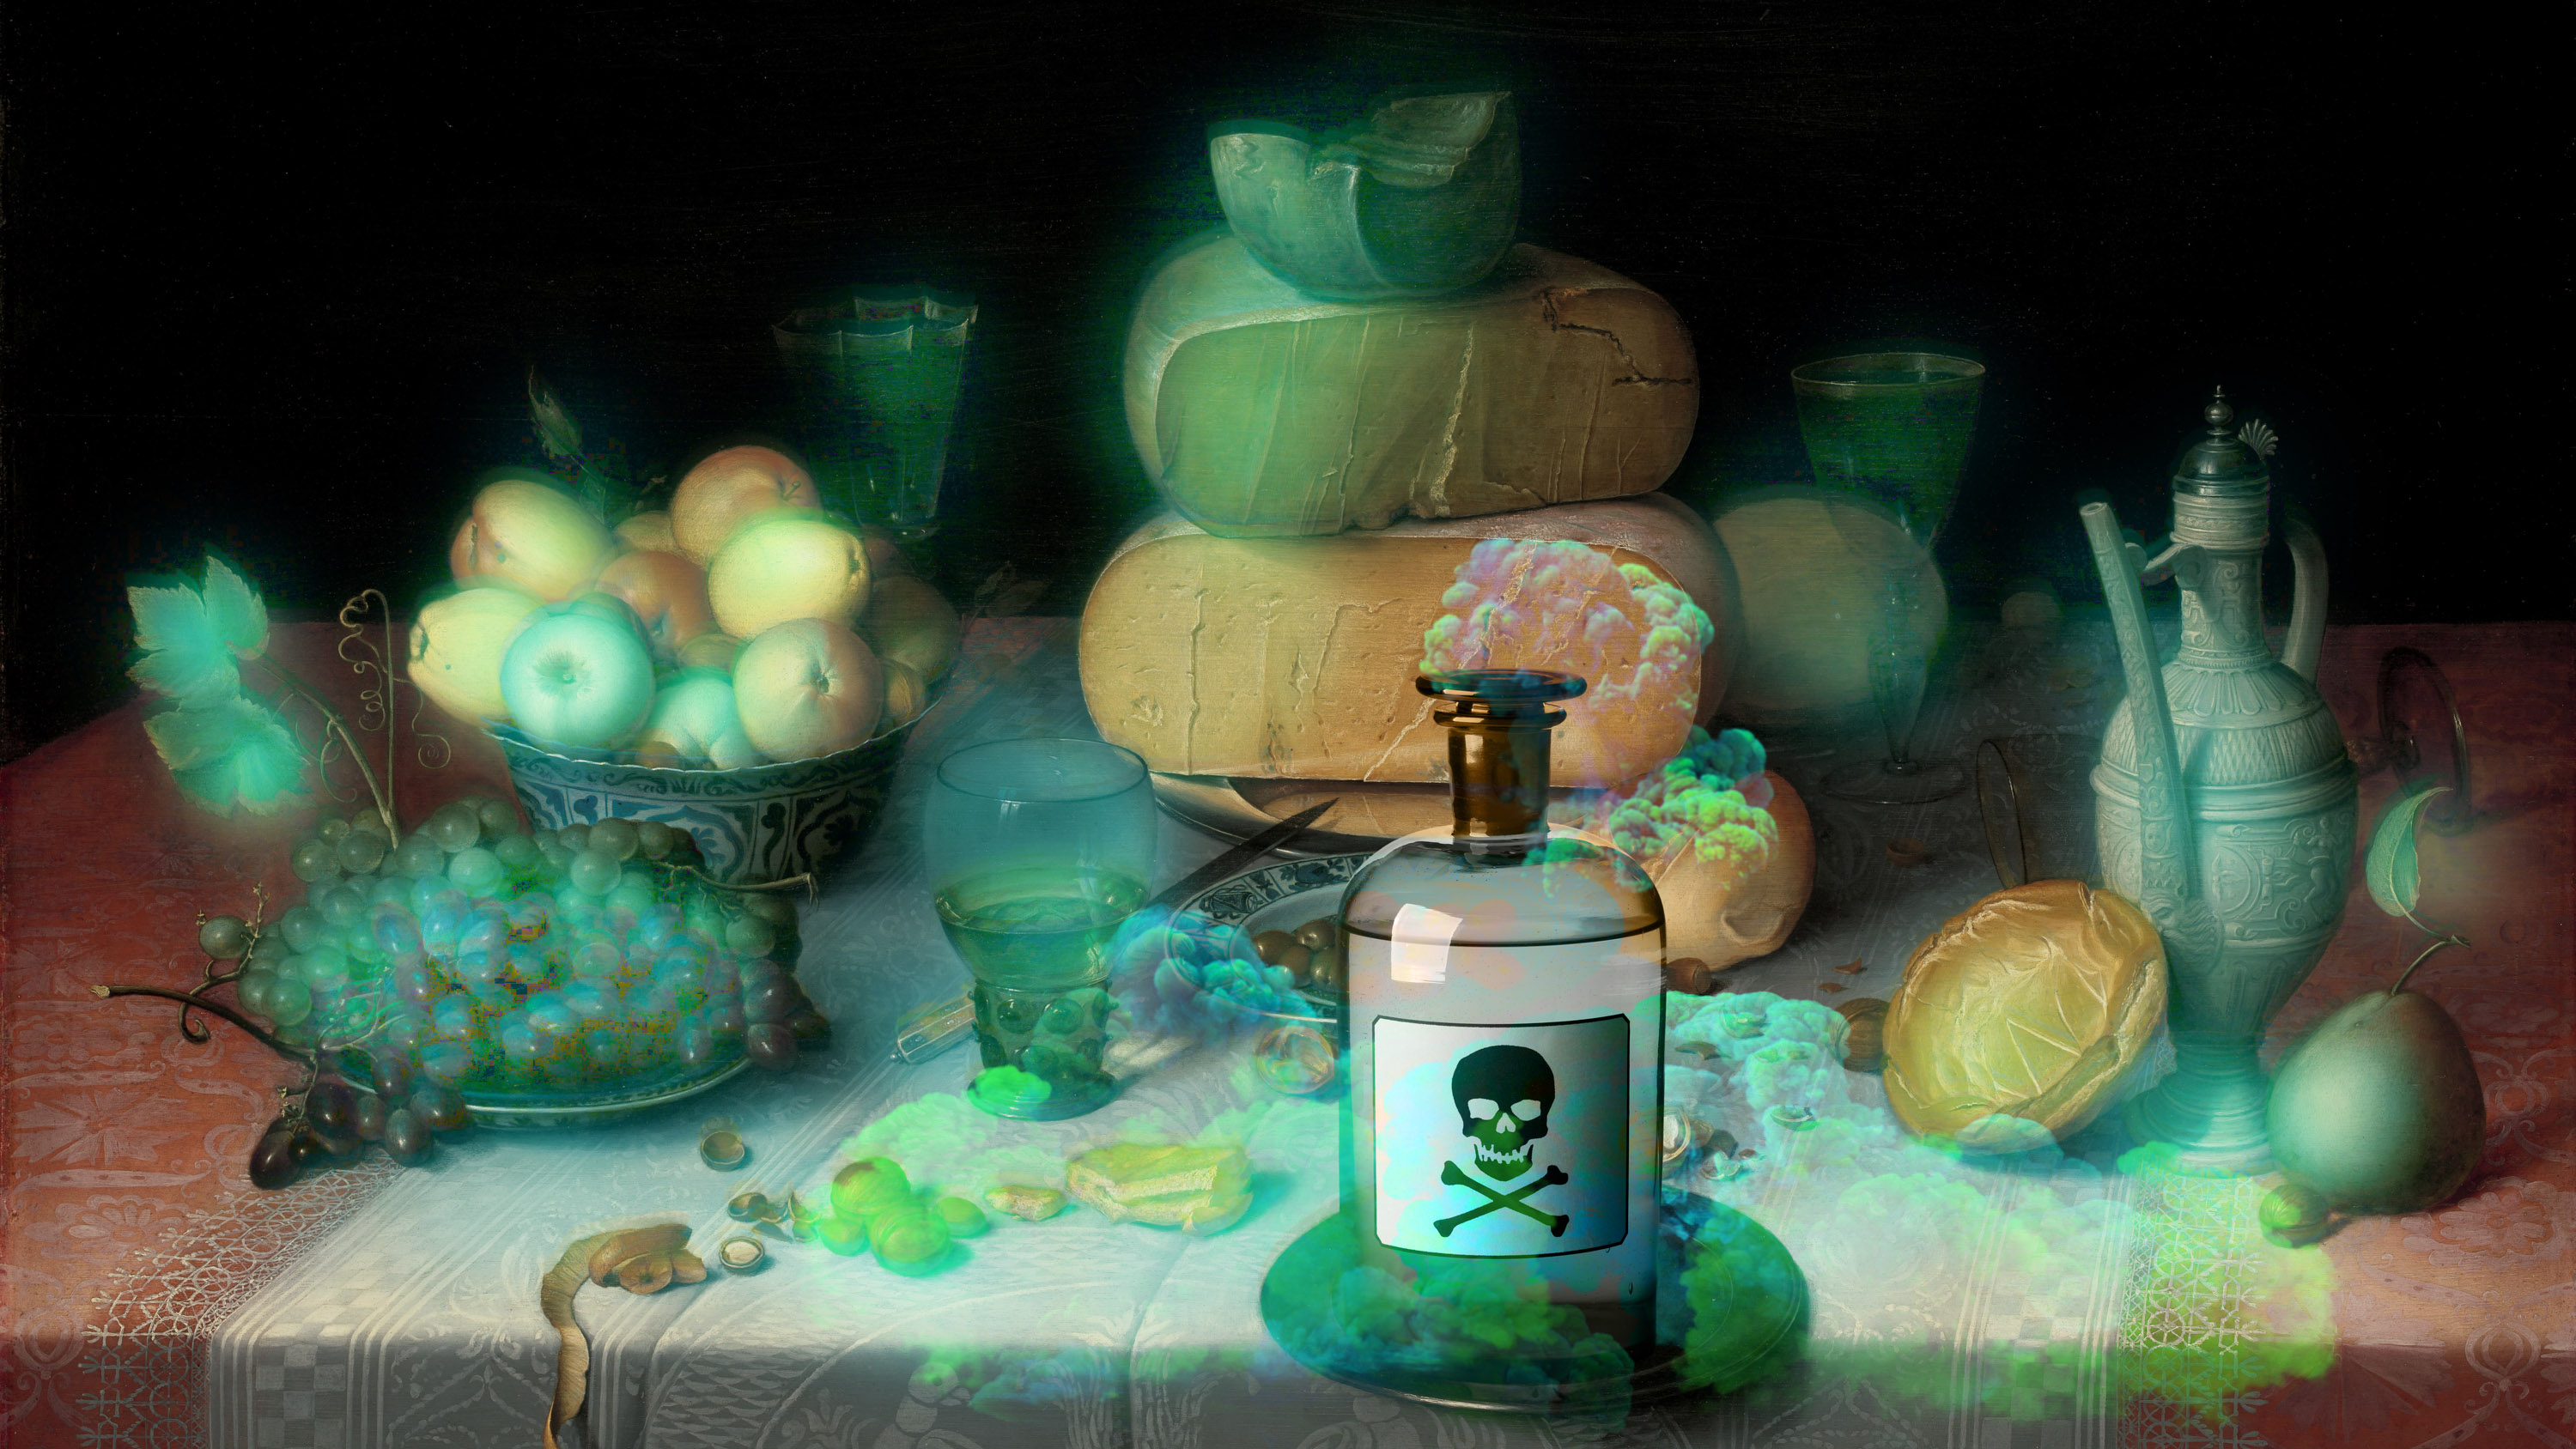 poisoned fumes spread through a still life painting causing glitches